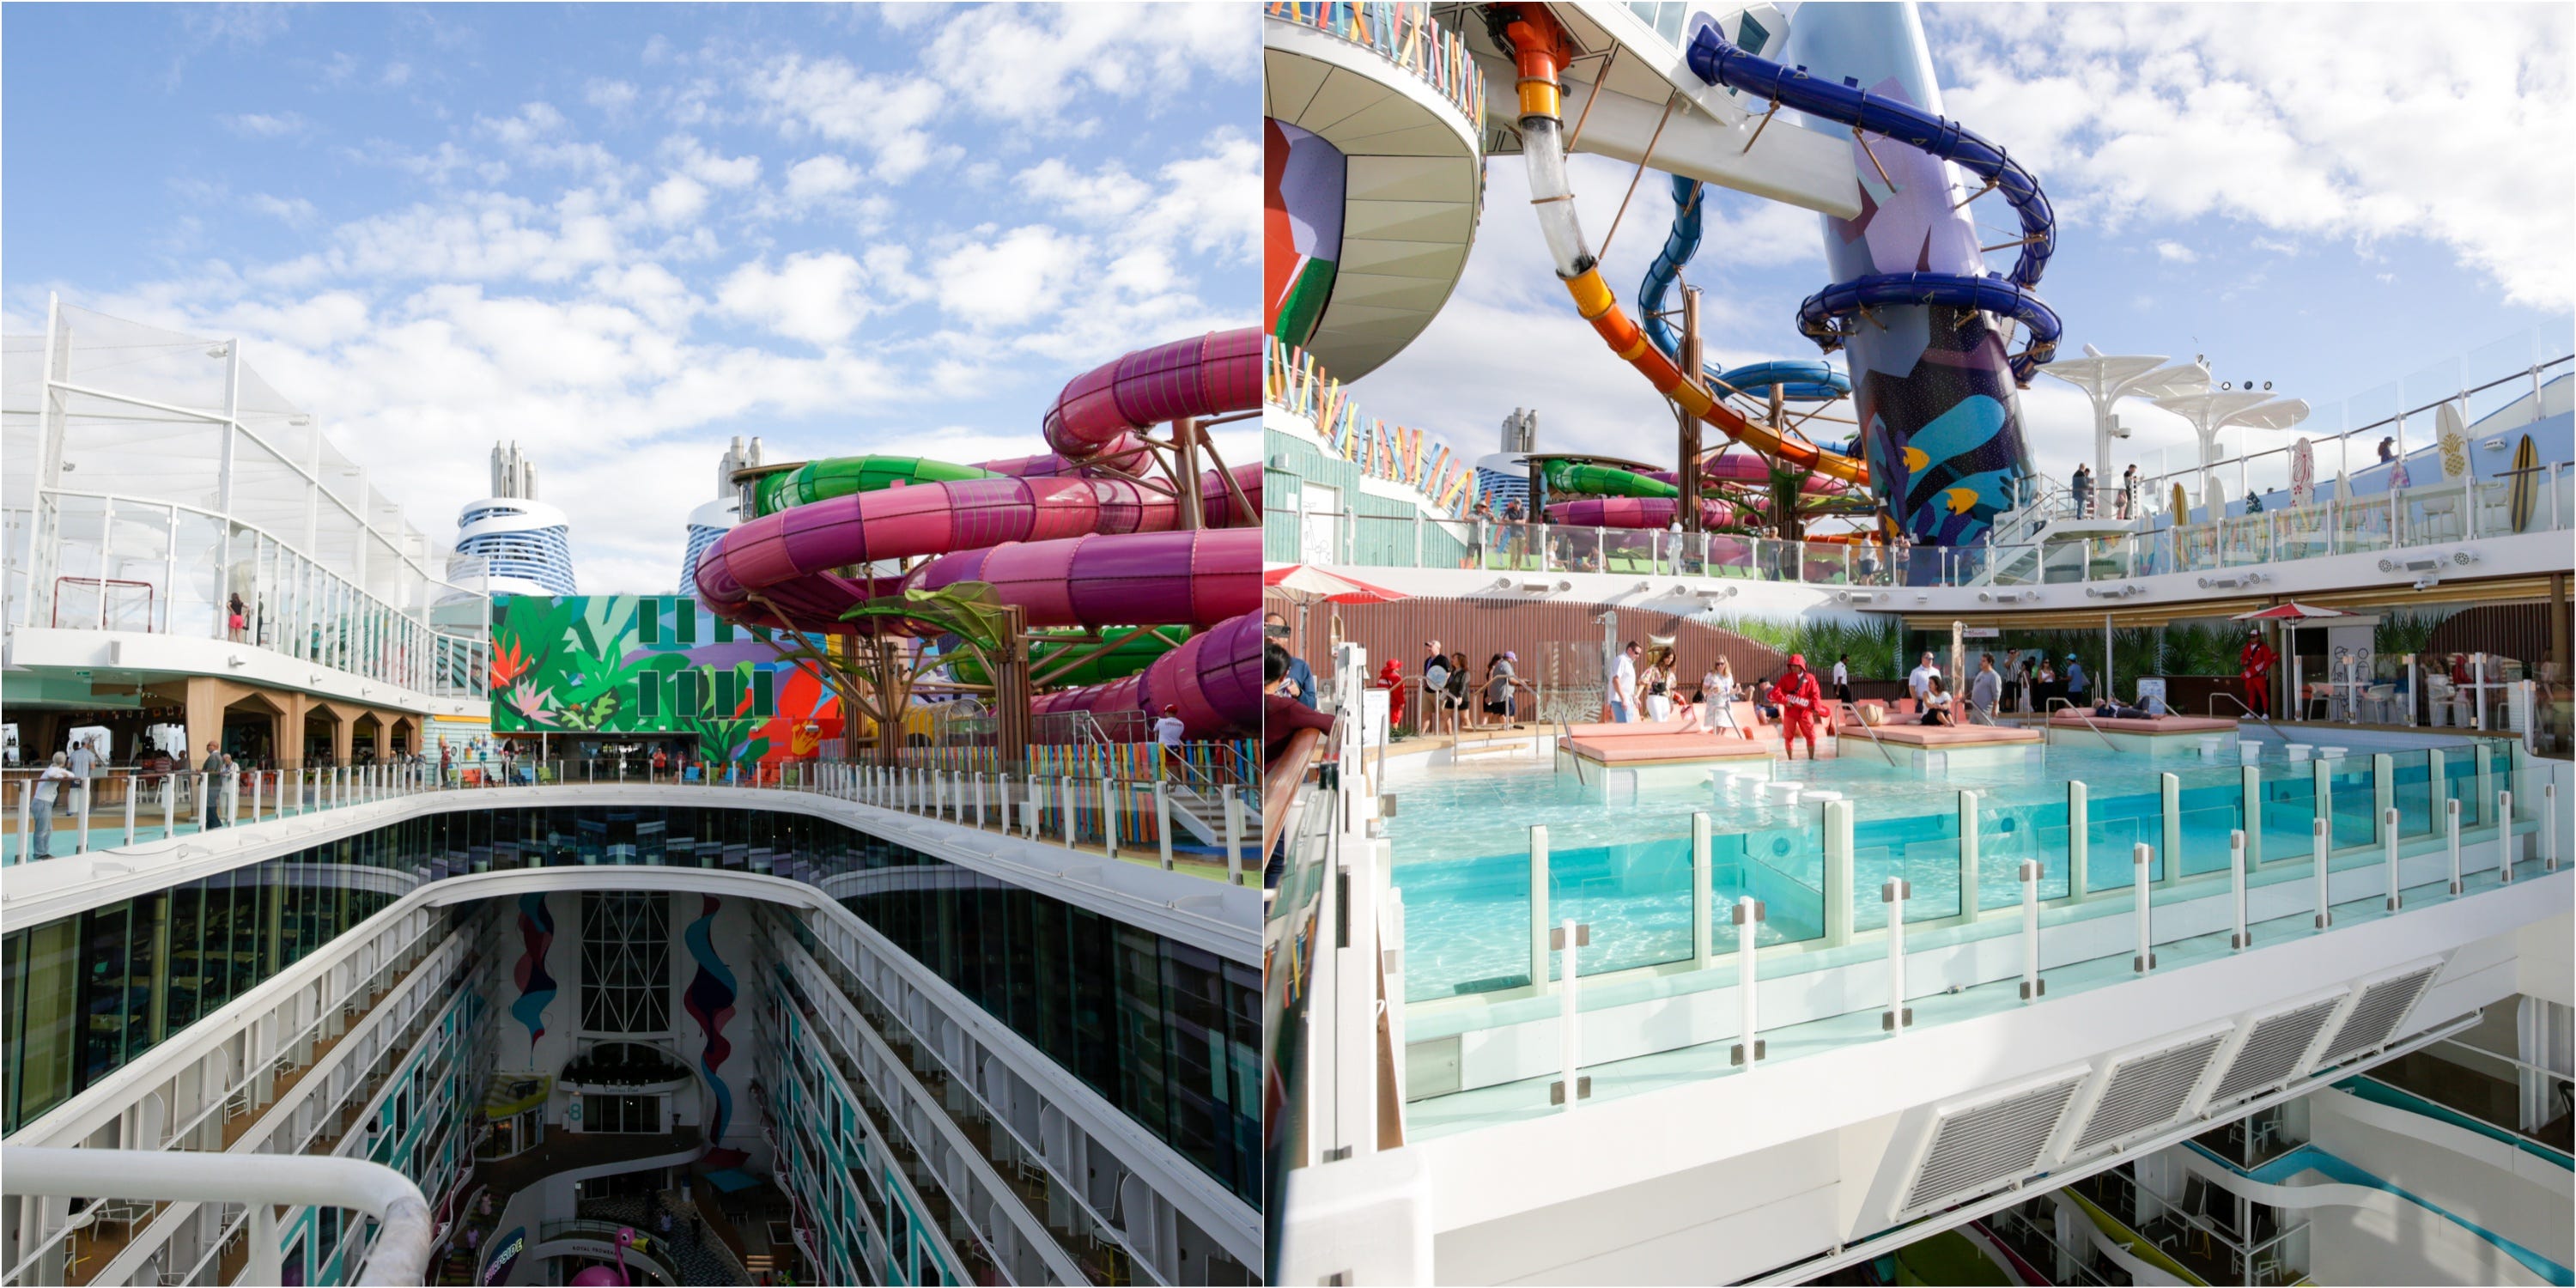 <p>The rows of pools flowed perfectly into Thrill Island's <a href="https://www.businessinsider.com/coolest-features-royal-caribbeans-new-largest-cruise-ship-2022-11">waterpark</a>, rock climbing walls, mini-golf course, and Crown's Edge.</p><p>The best part? The <a href="https://www.businessinsider.com/things-about-royal-caribbean-icon-of-the-seas-2024-1">adult-only Hideaway</a> — which flexes an infinity pool club with a DJ — is right behind Thrill Island, creating a clear separation between parents and their children without being too far from each other.</p>